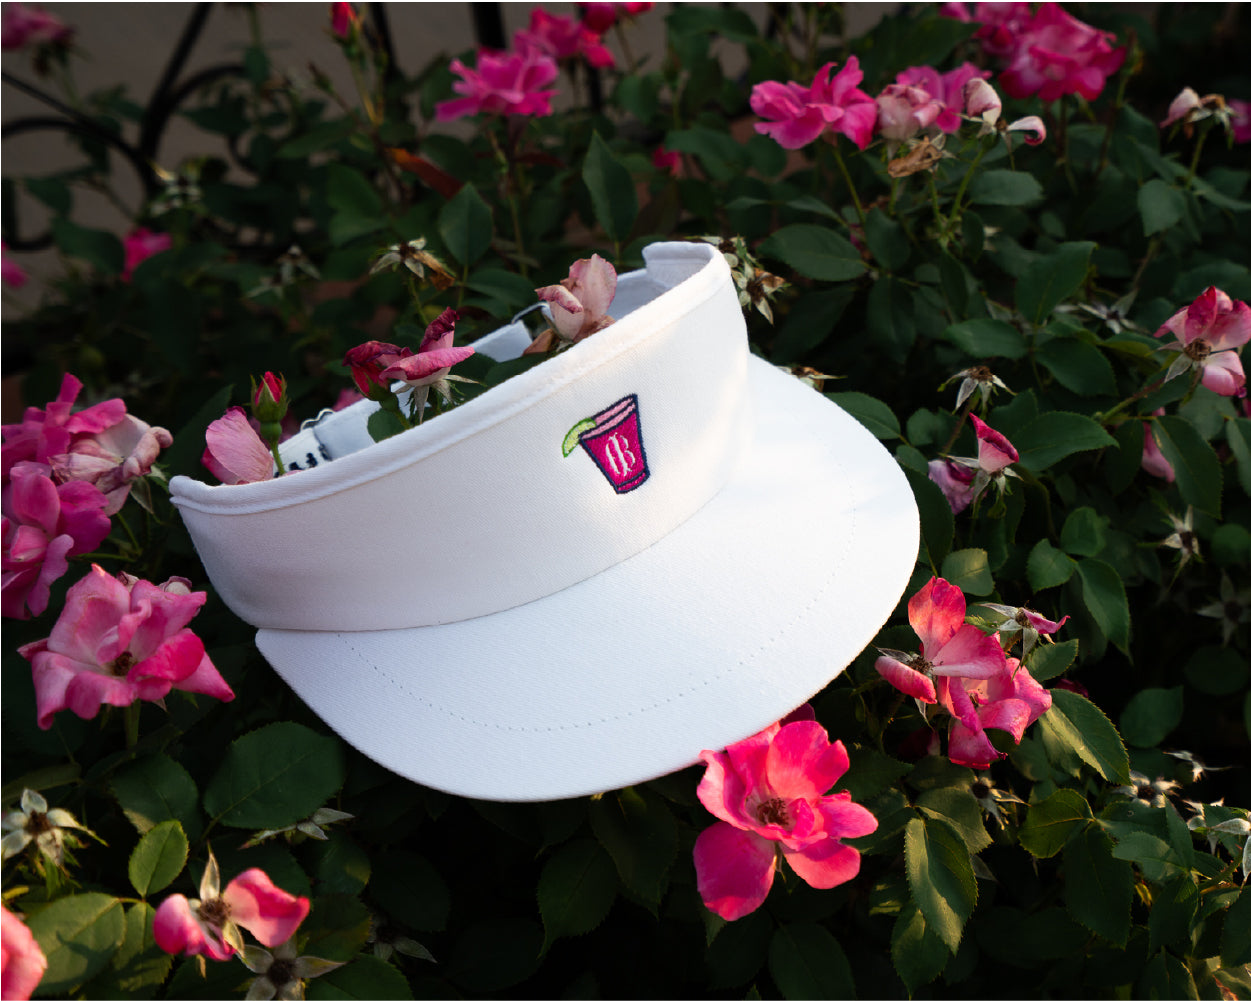 Holderness and Bourne white tour visor golf hat with branded pink cocktail logo perched on top of a bush with pink flowers.